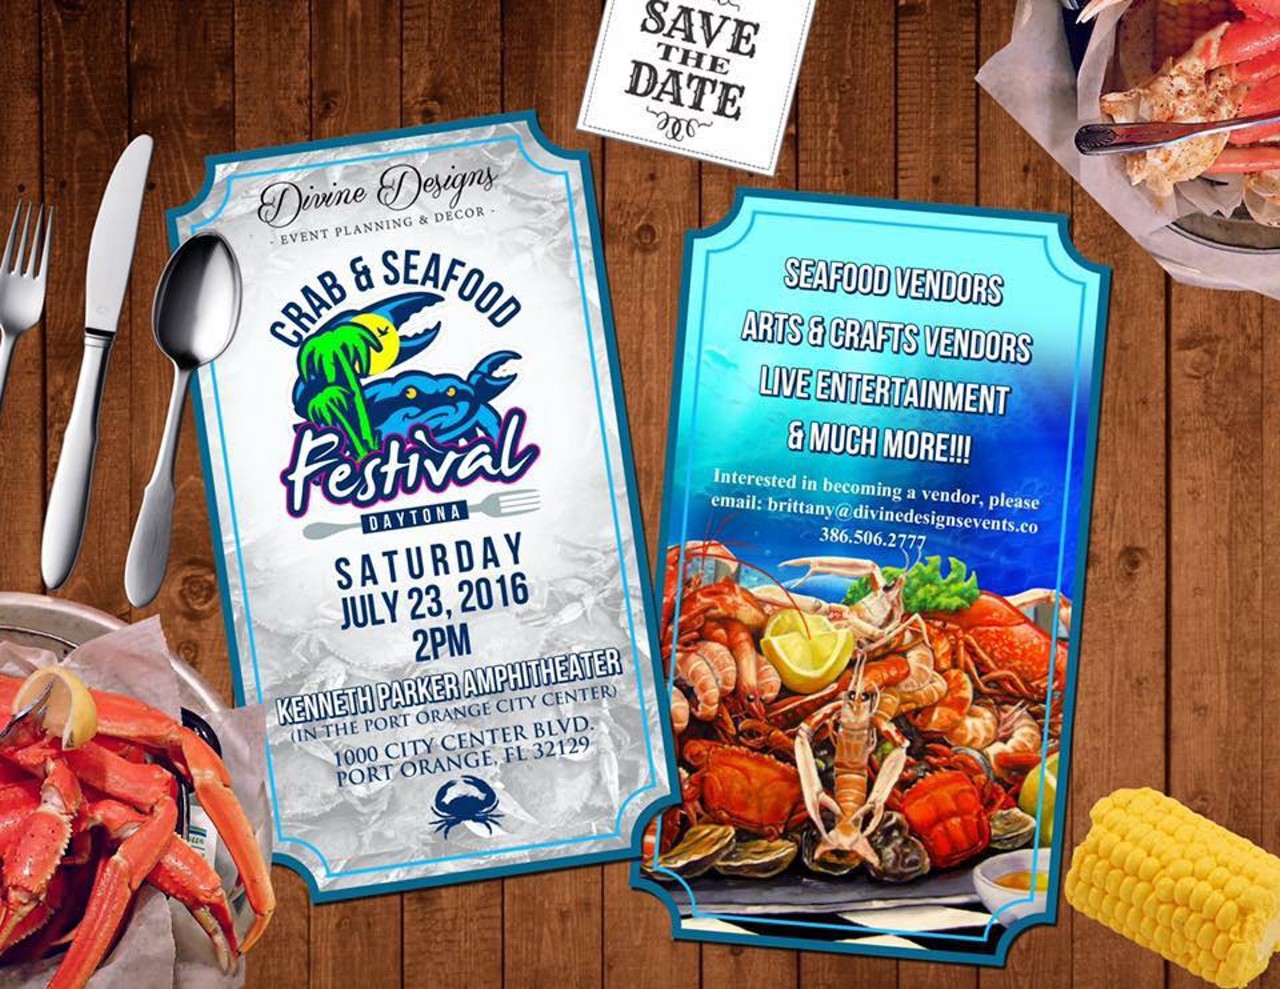 Crab & Seafood Festival
1000 City Center Blvd. Port Orange, July 23, 2-8 p.m.
This is a free event in the Kenneth Parker Amphitheater where you&#146;ll find lots of seafood vendors, arts and crafts. They will also be featuring live entertainment from the Roscoe Jenkins Band. 
Photo via Divine Designs Event Planning & Decor LLC